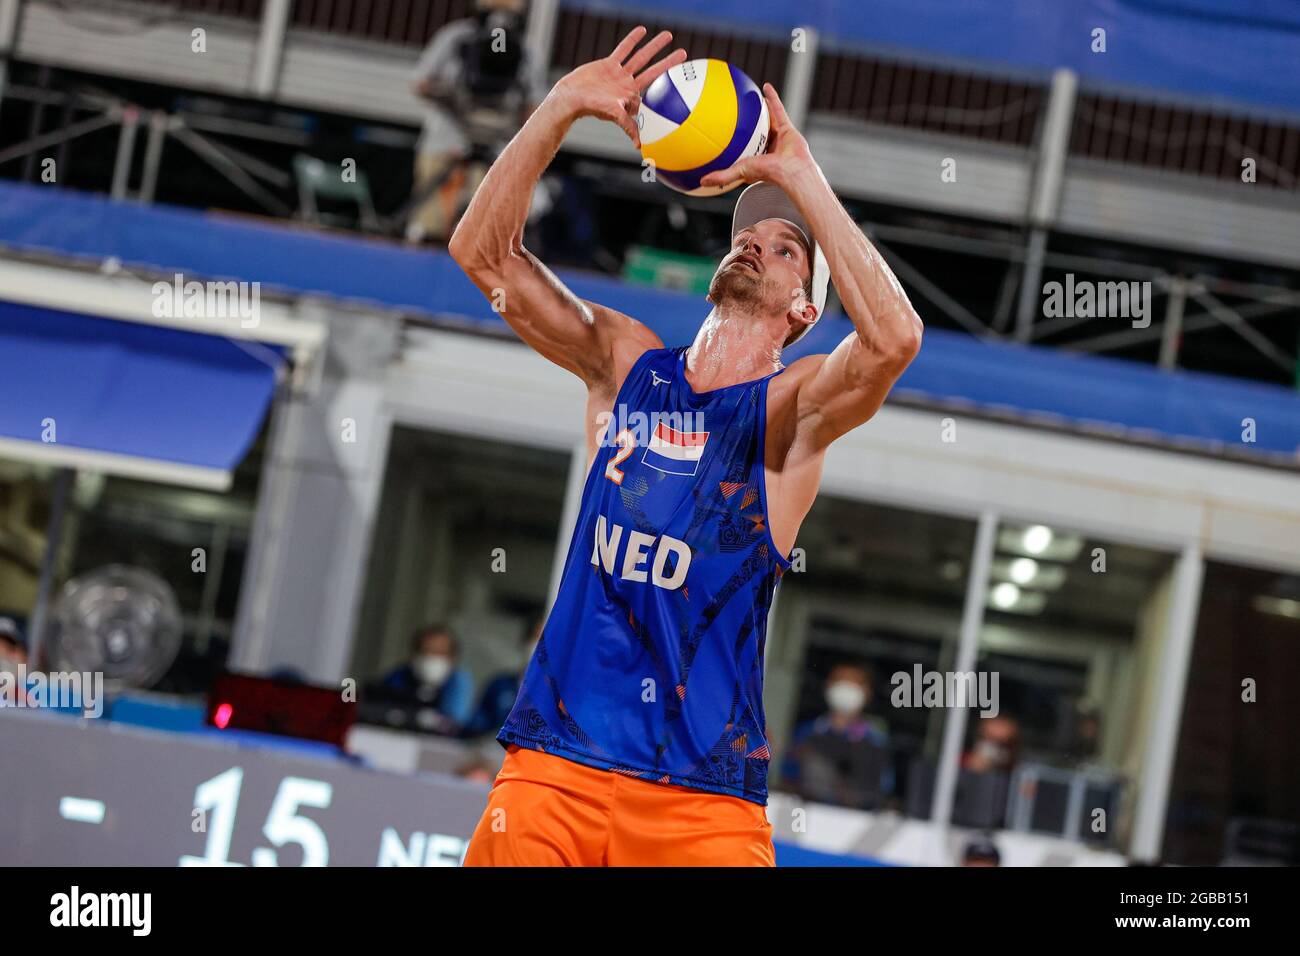 TOKYO, JAPAN - AUGUST 1: Robert Meeuwsen of the Netherlands competing on Men's Round 16 during the Tokyo 2020 Olympic Games at the Shiokaze Park on August 1, 2021 in Tokyo, Japan (Photo by Pim Waslander/Orange Pictures) NOCNSF Stock Photo